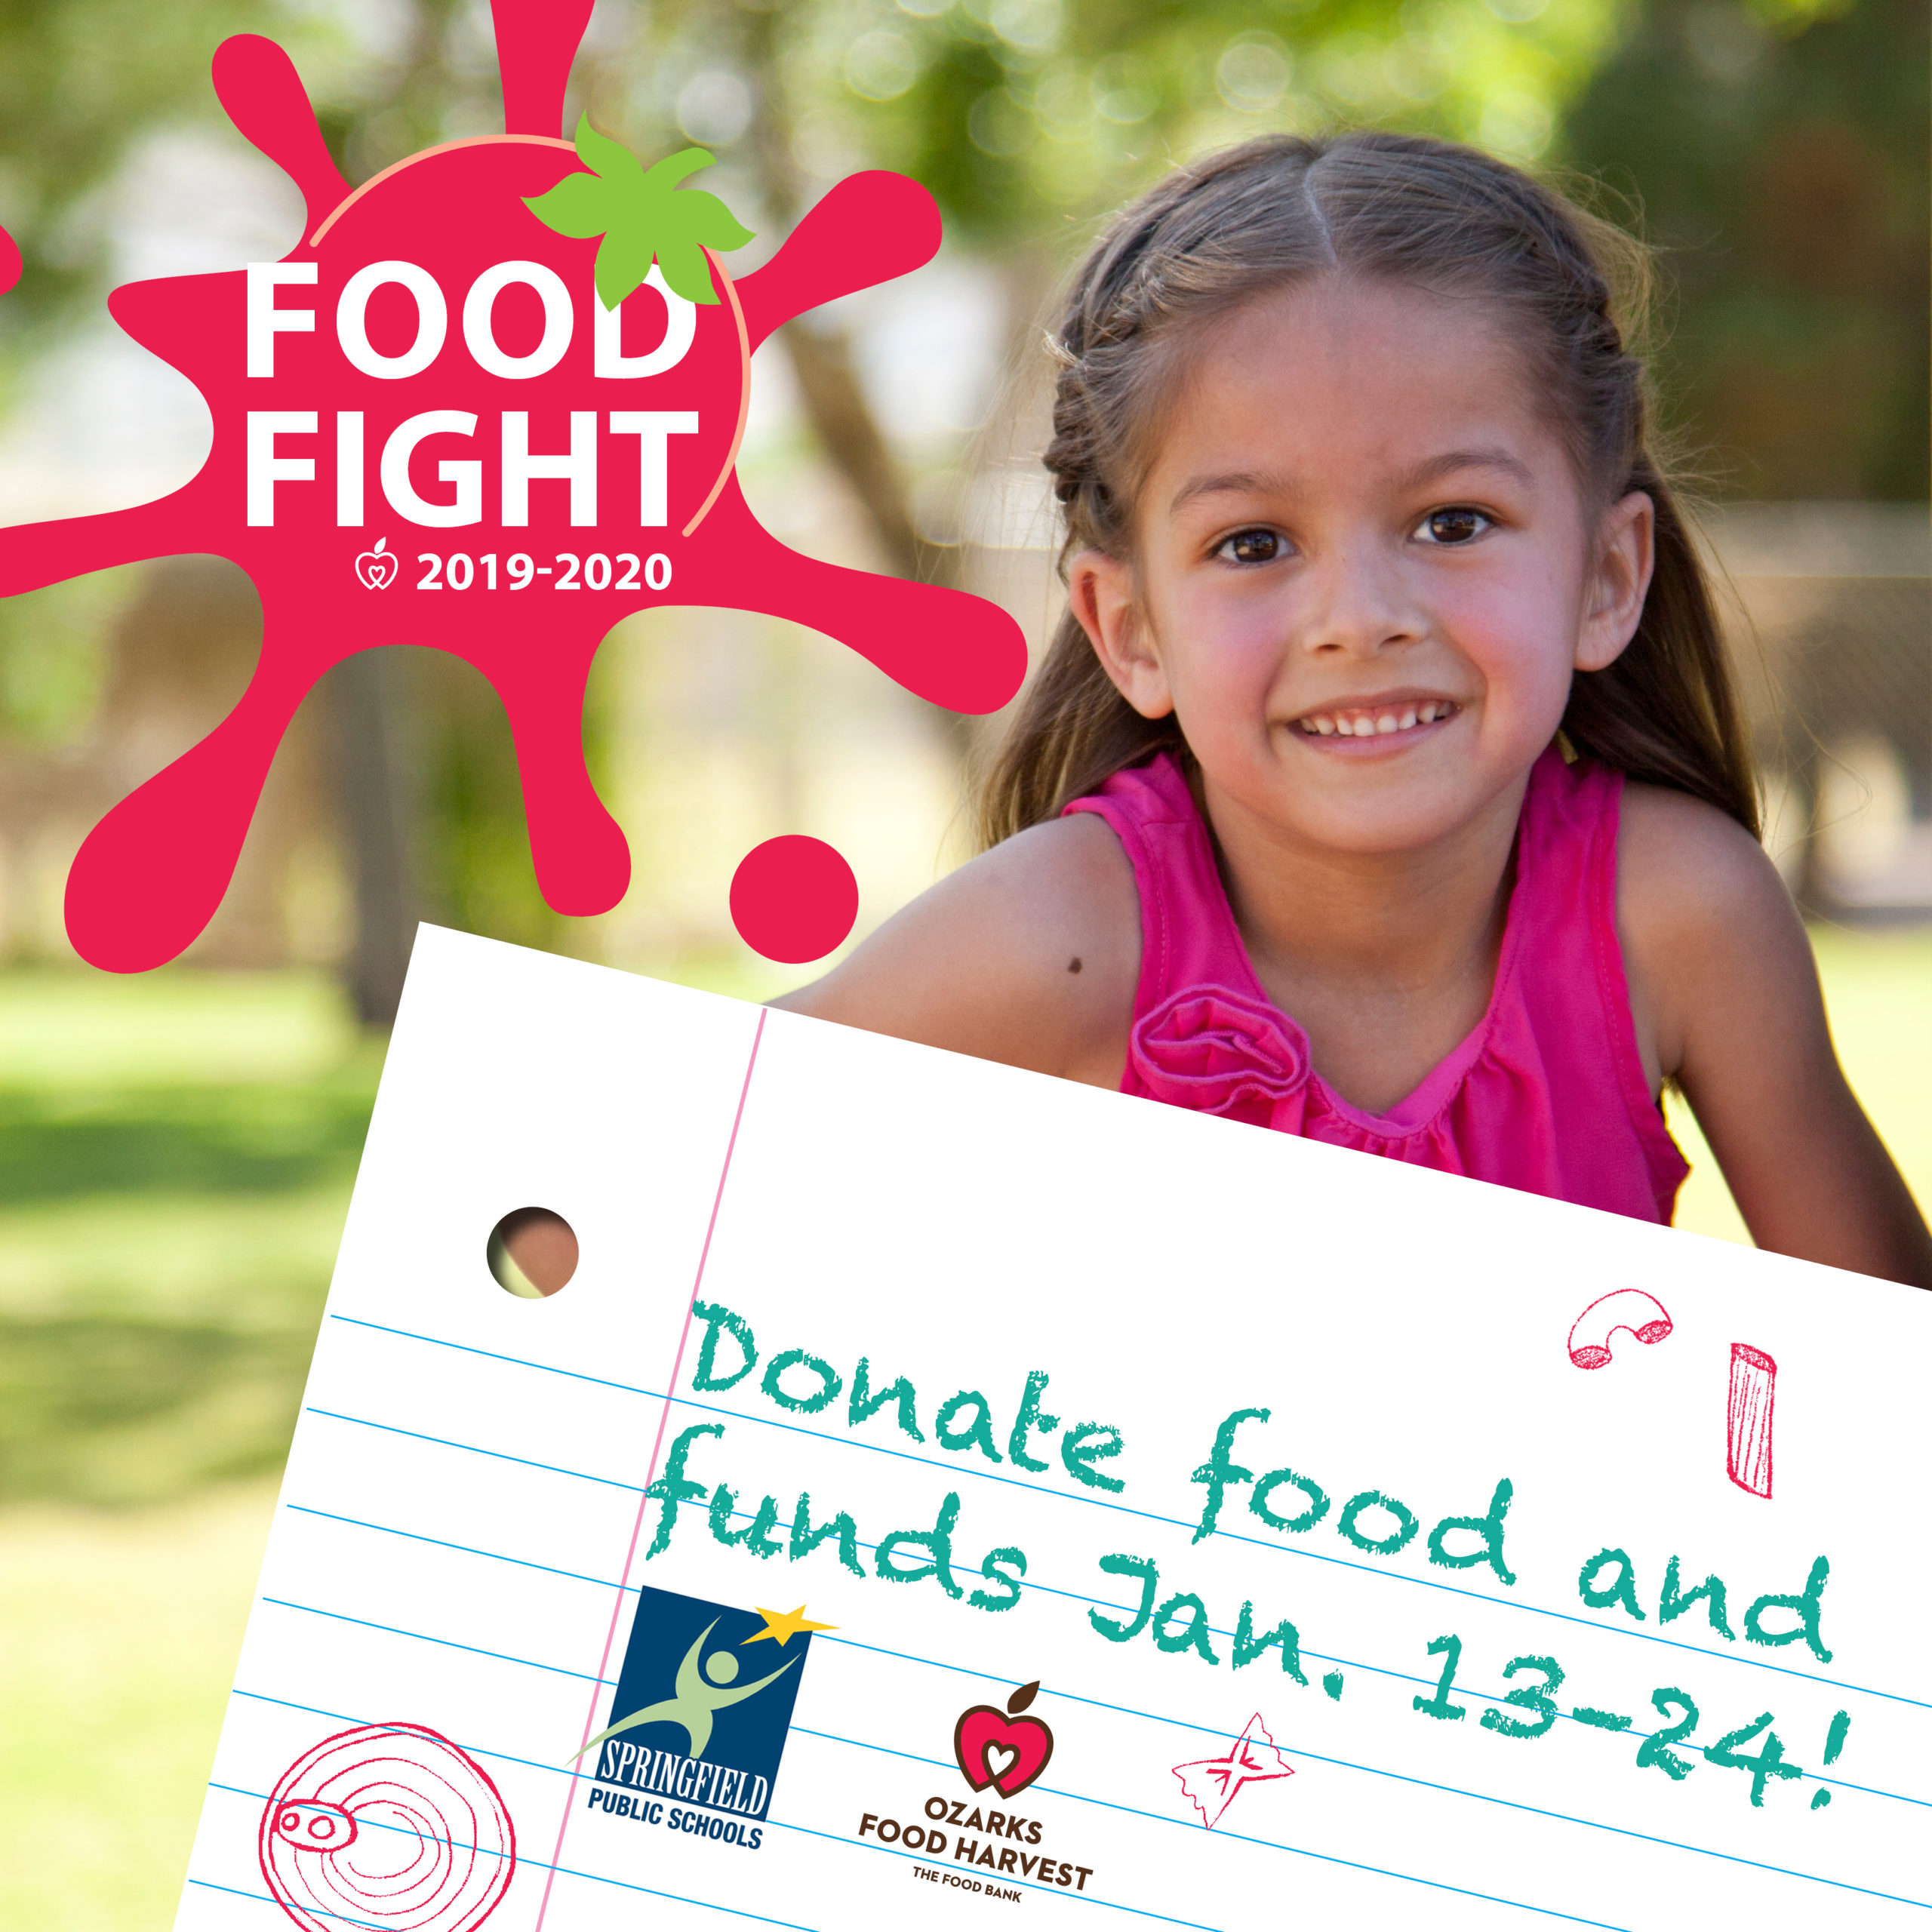 Donate food and funds during Food Fight